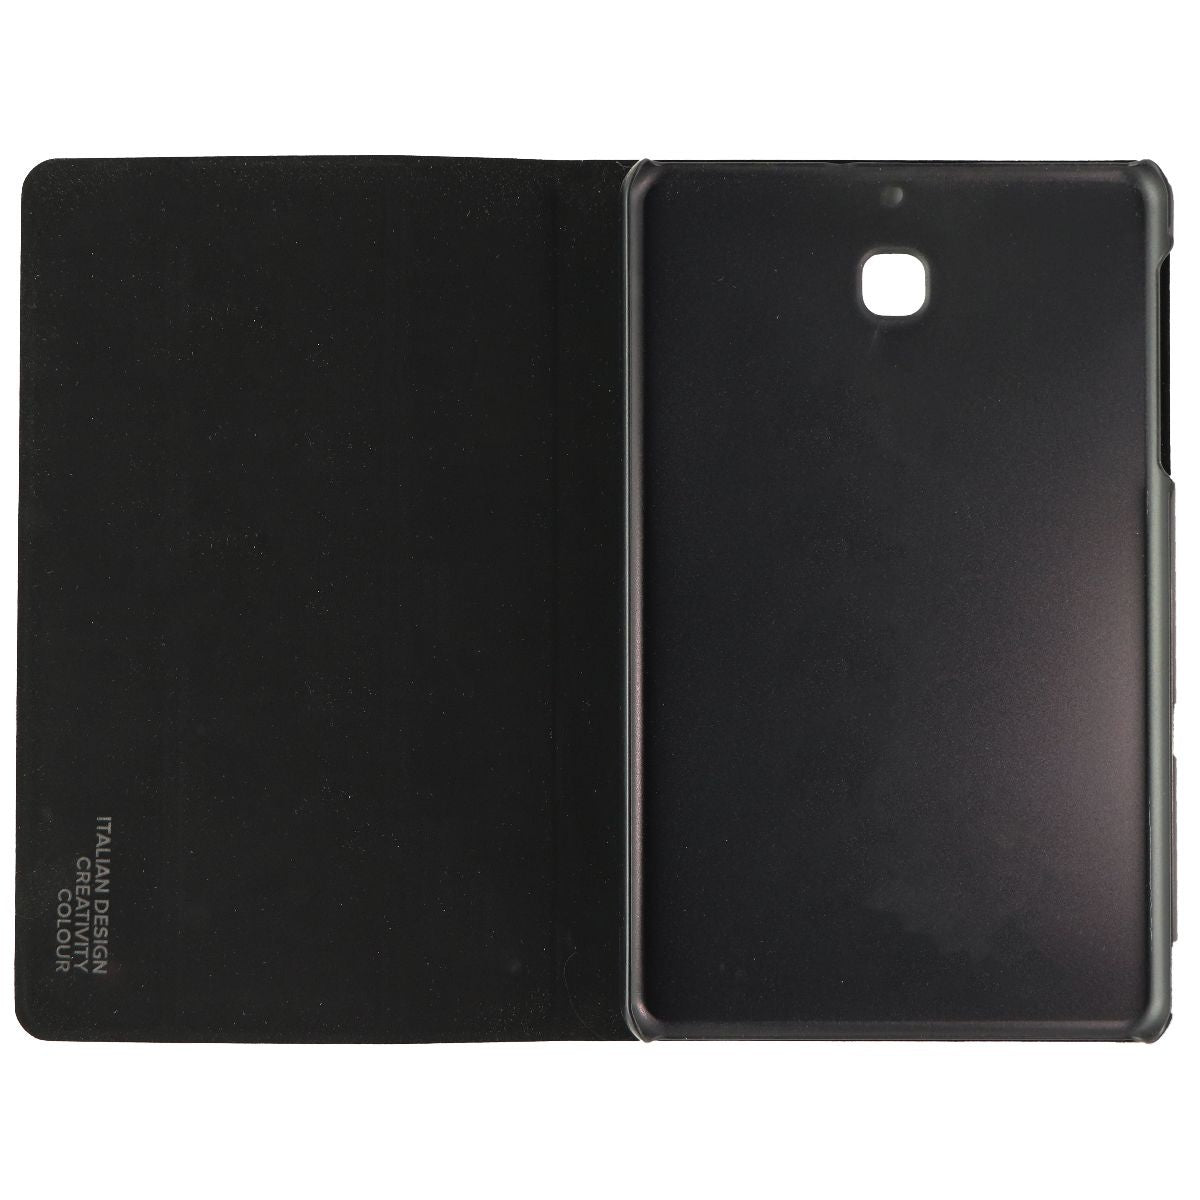 Tucano Gala Folio Case for Samsung Galaxy Tab A8 - Black iPad/Tablet Accessories - Cases, Covers, Keyboard Folios Tucano    - Simple Cell Bulk Wholesale Pricing - USA Seller